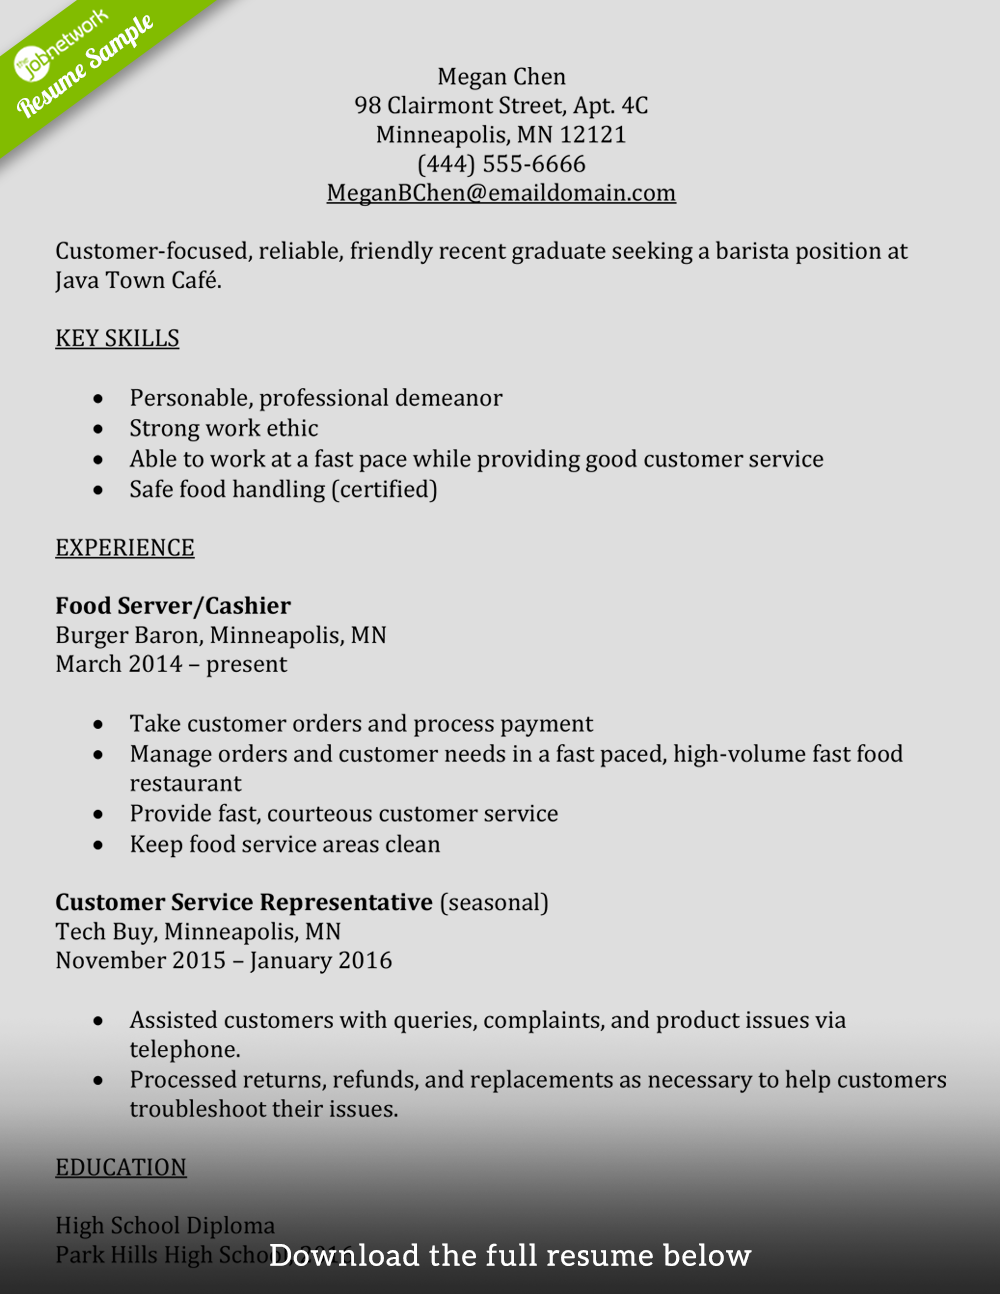 Example Of A Resume Barista Resume Entry Level example of a resume|wikiresume.com